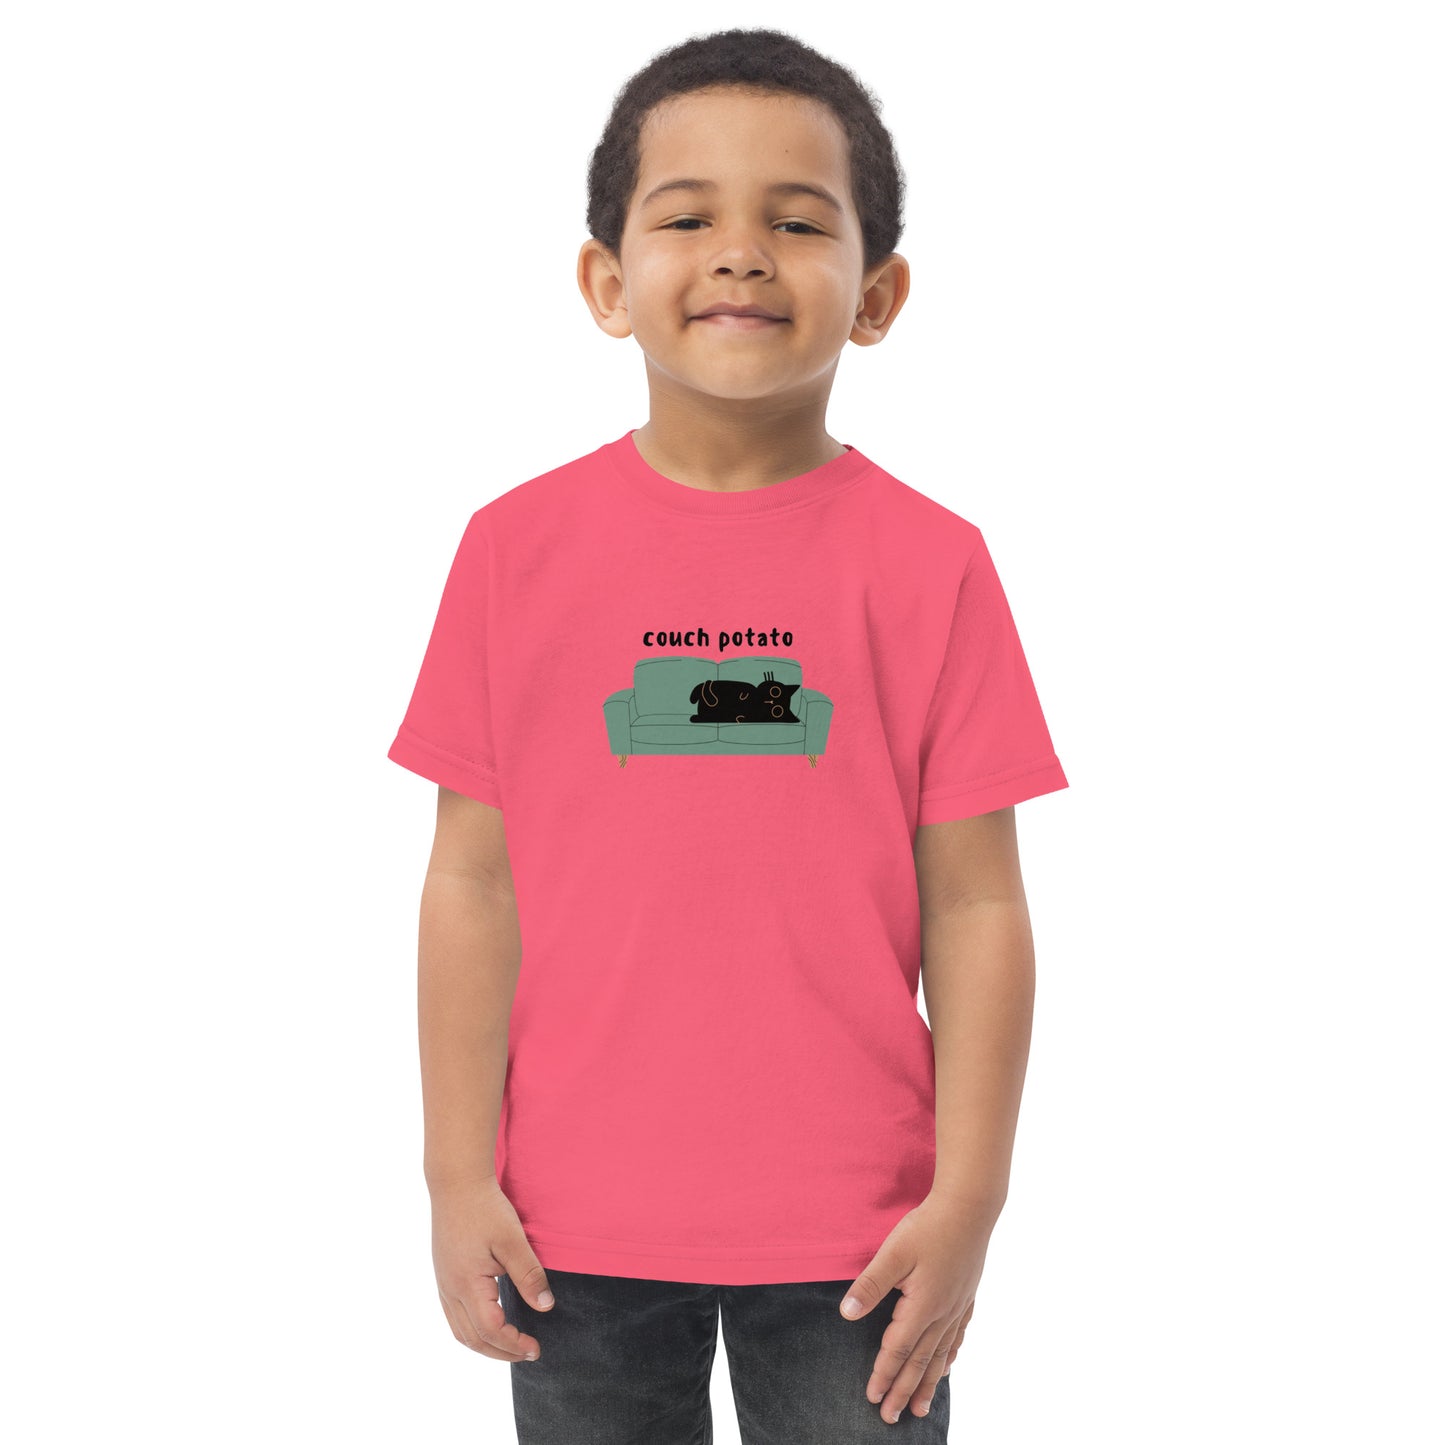 Couch Potato Toddler Tee